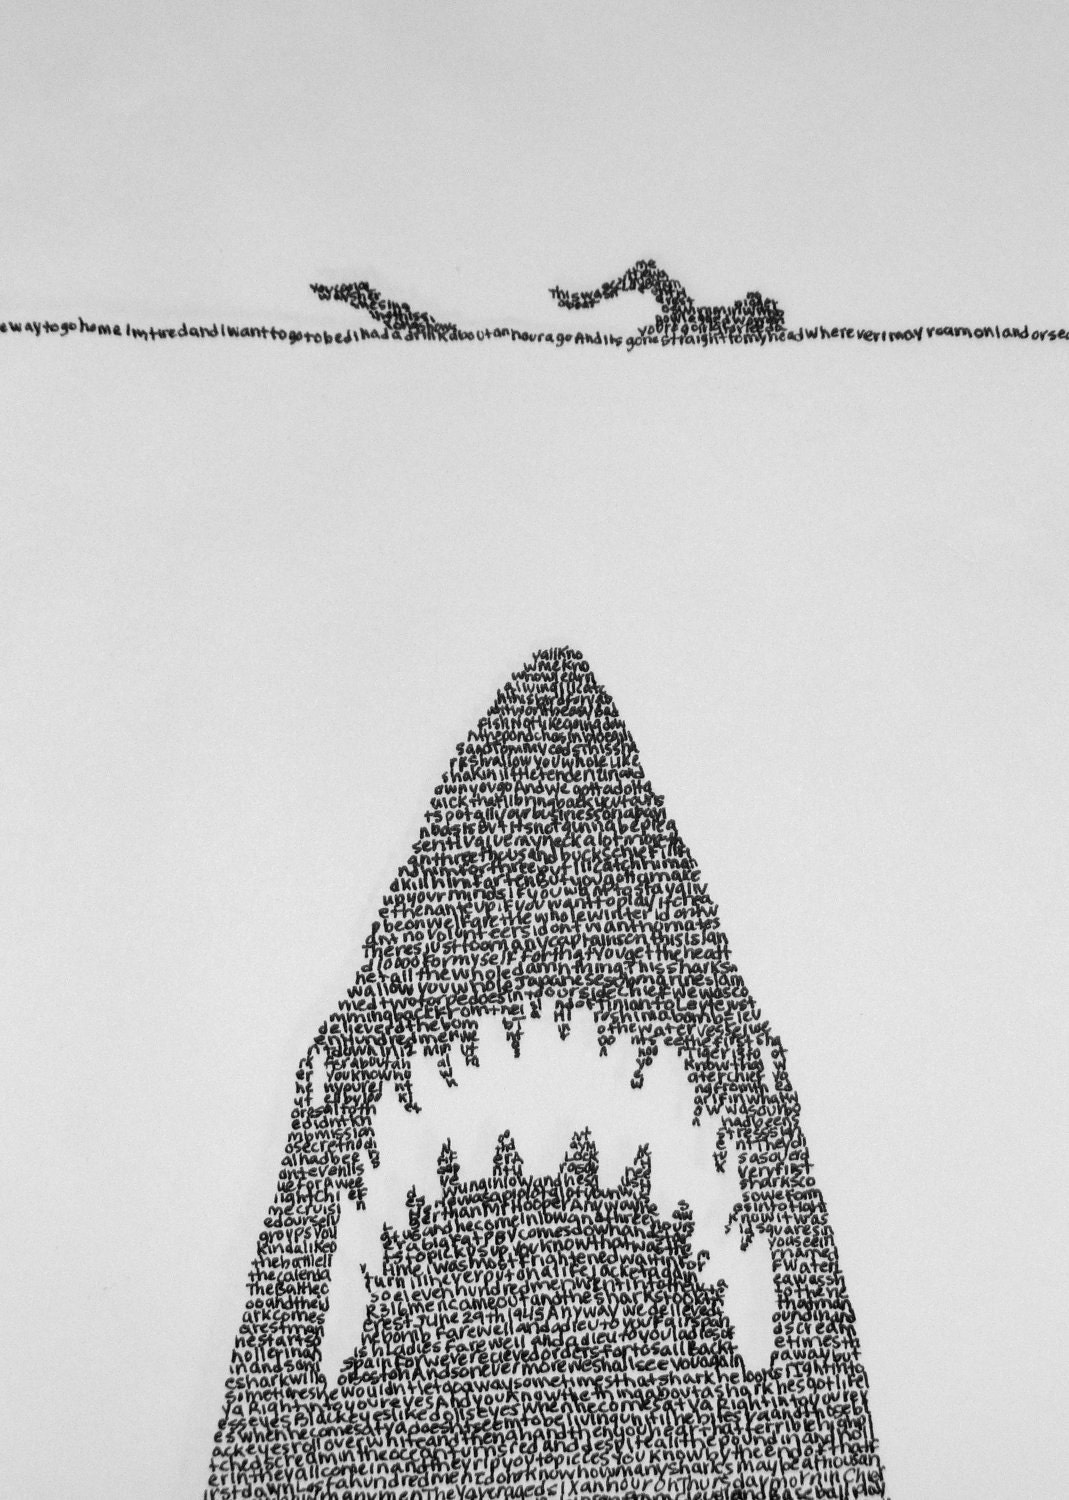 Jaws Poster Made from Movie Lines